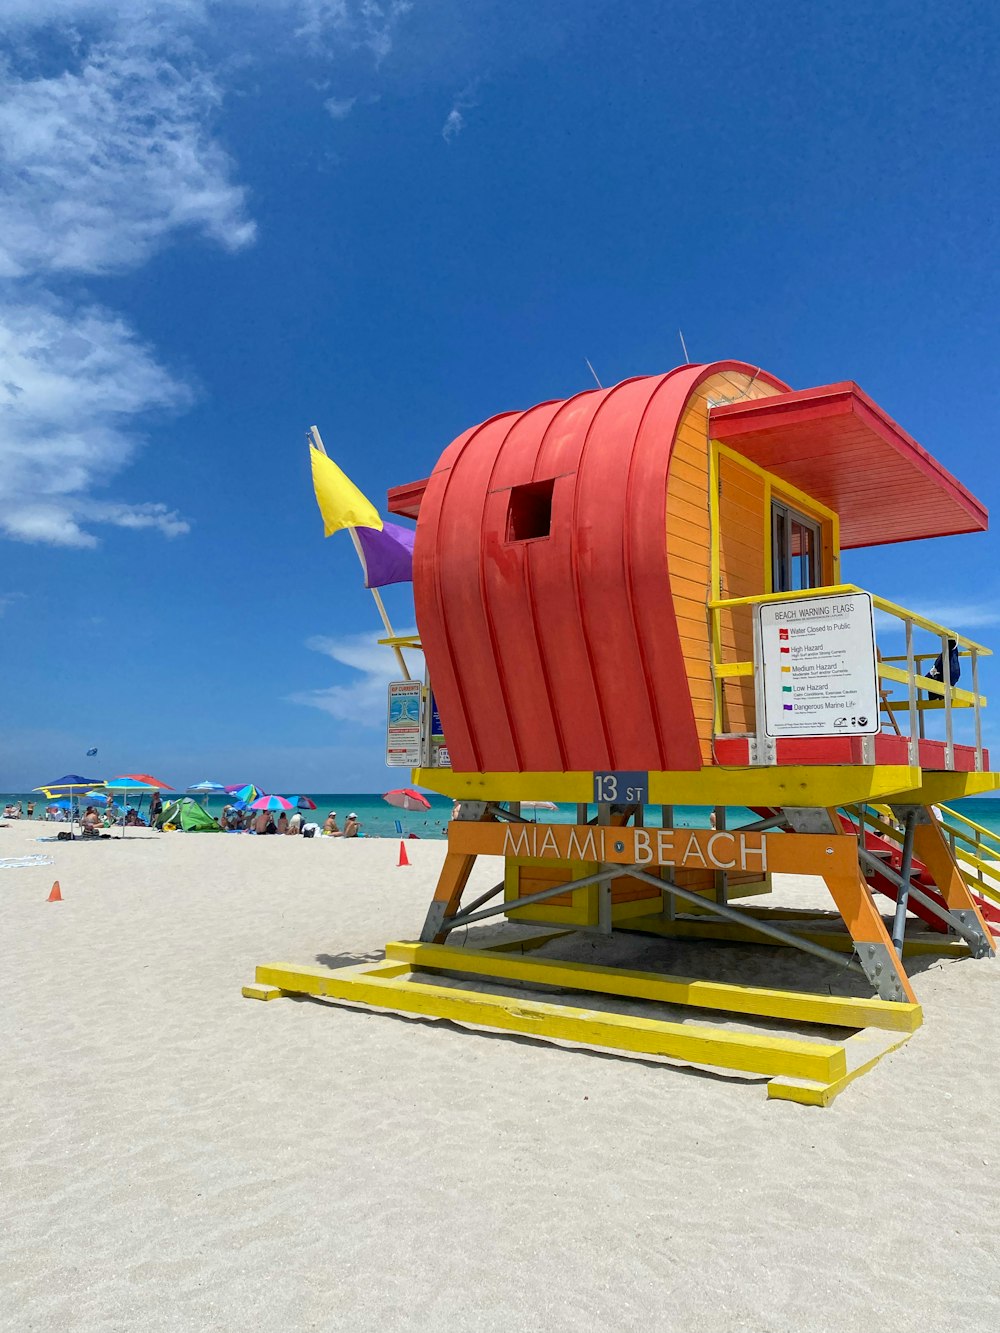 a lifeguard stand on the beach with a lifeguard flag